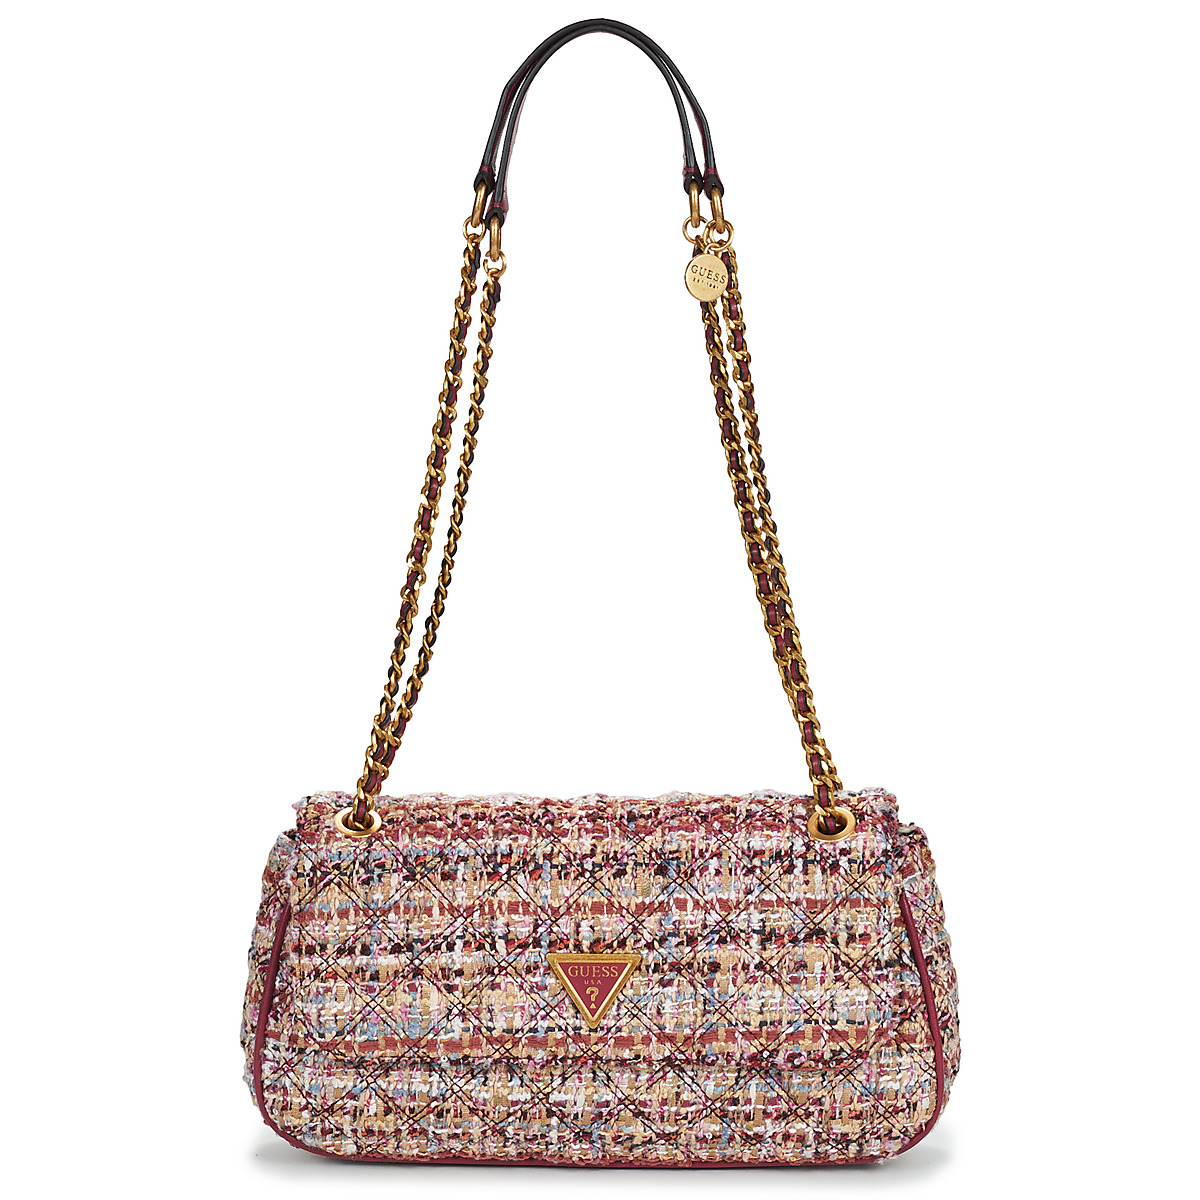 Malas Mulher Guess DINNER DATE CLUTCH GIULLY Multicolor